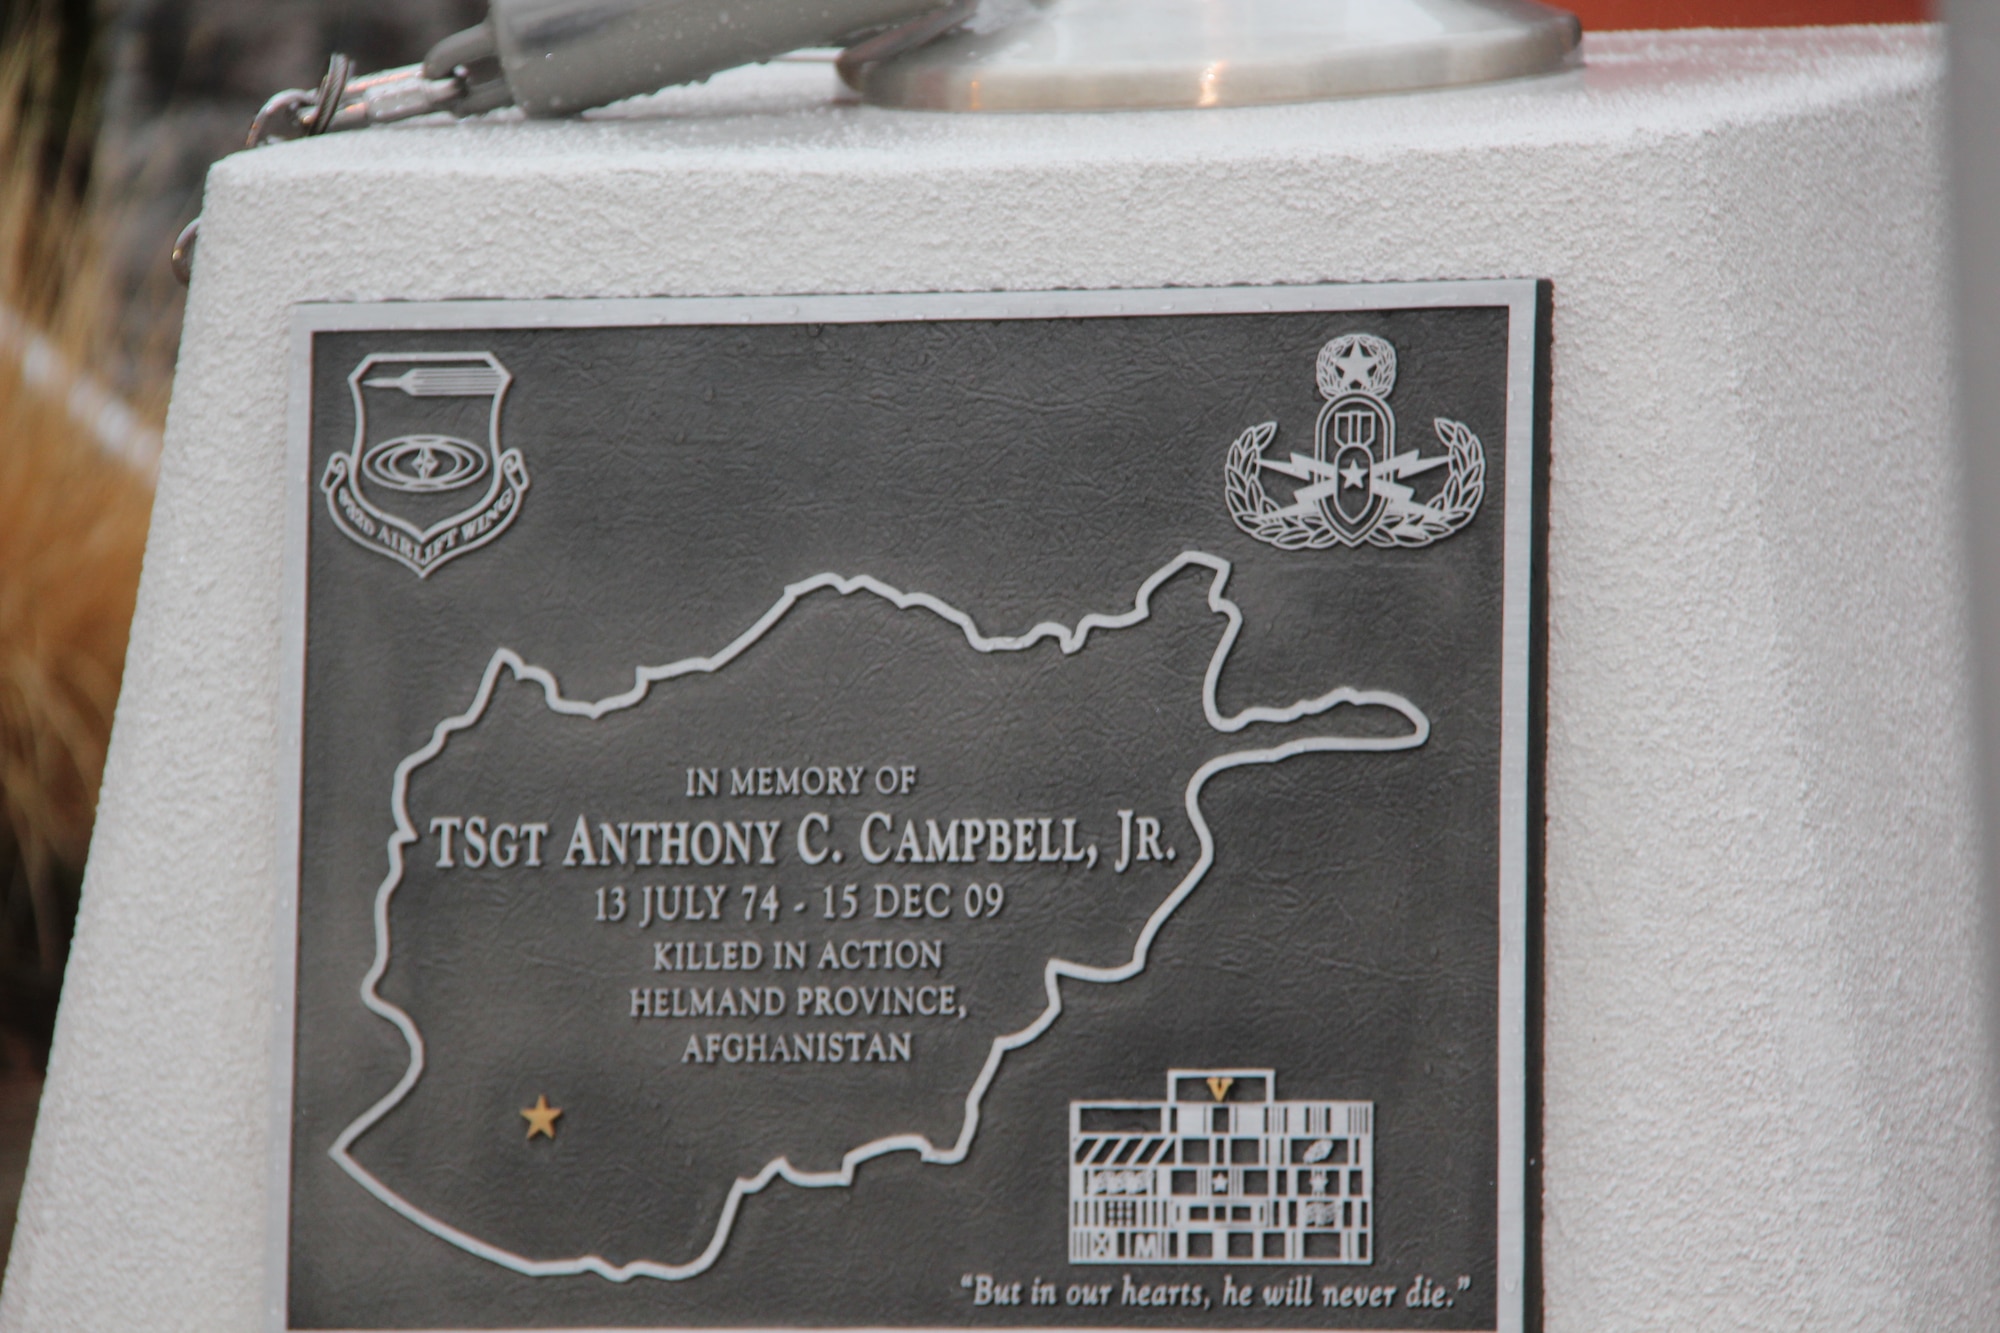 Scott Air Force Base, Ill.--The engraved plaque was dedicated to Tech. Sgt. Anthony Campbell who was killed during combat operations while deployed to Afghanistan. The plaque is mounted on the flag pole base in front of the 932nd Airlift Wing headquarters building.  Sergeant Campbell was an explosive ordnance disposal specialist who was assigned to the 932nd Civil Engineer Squadron. The ceremony was held at the December unit training assembly. (Courtesy photo/932nd AW Public Affairs)  